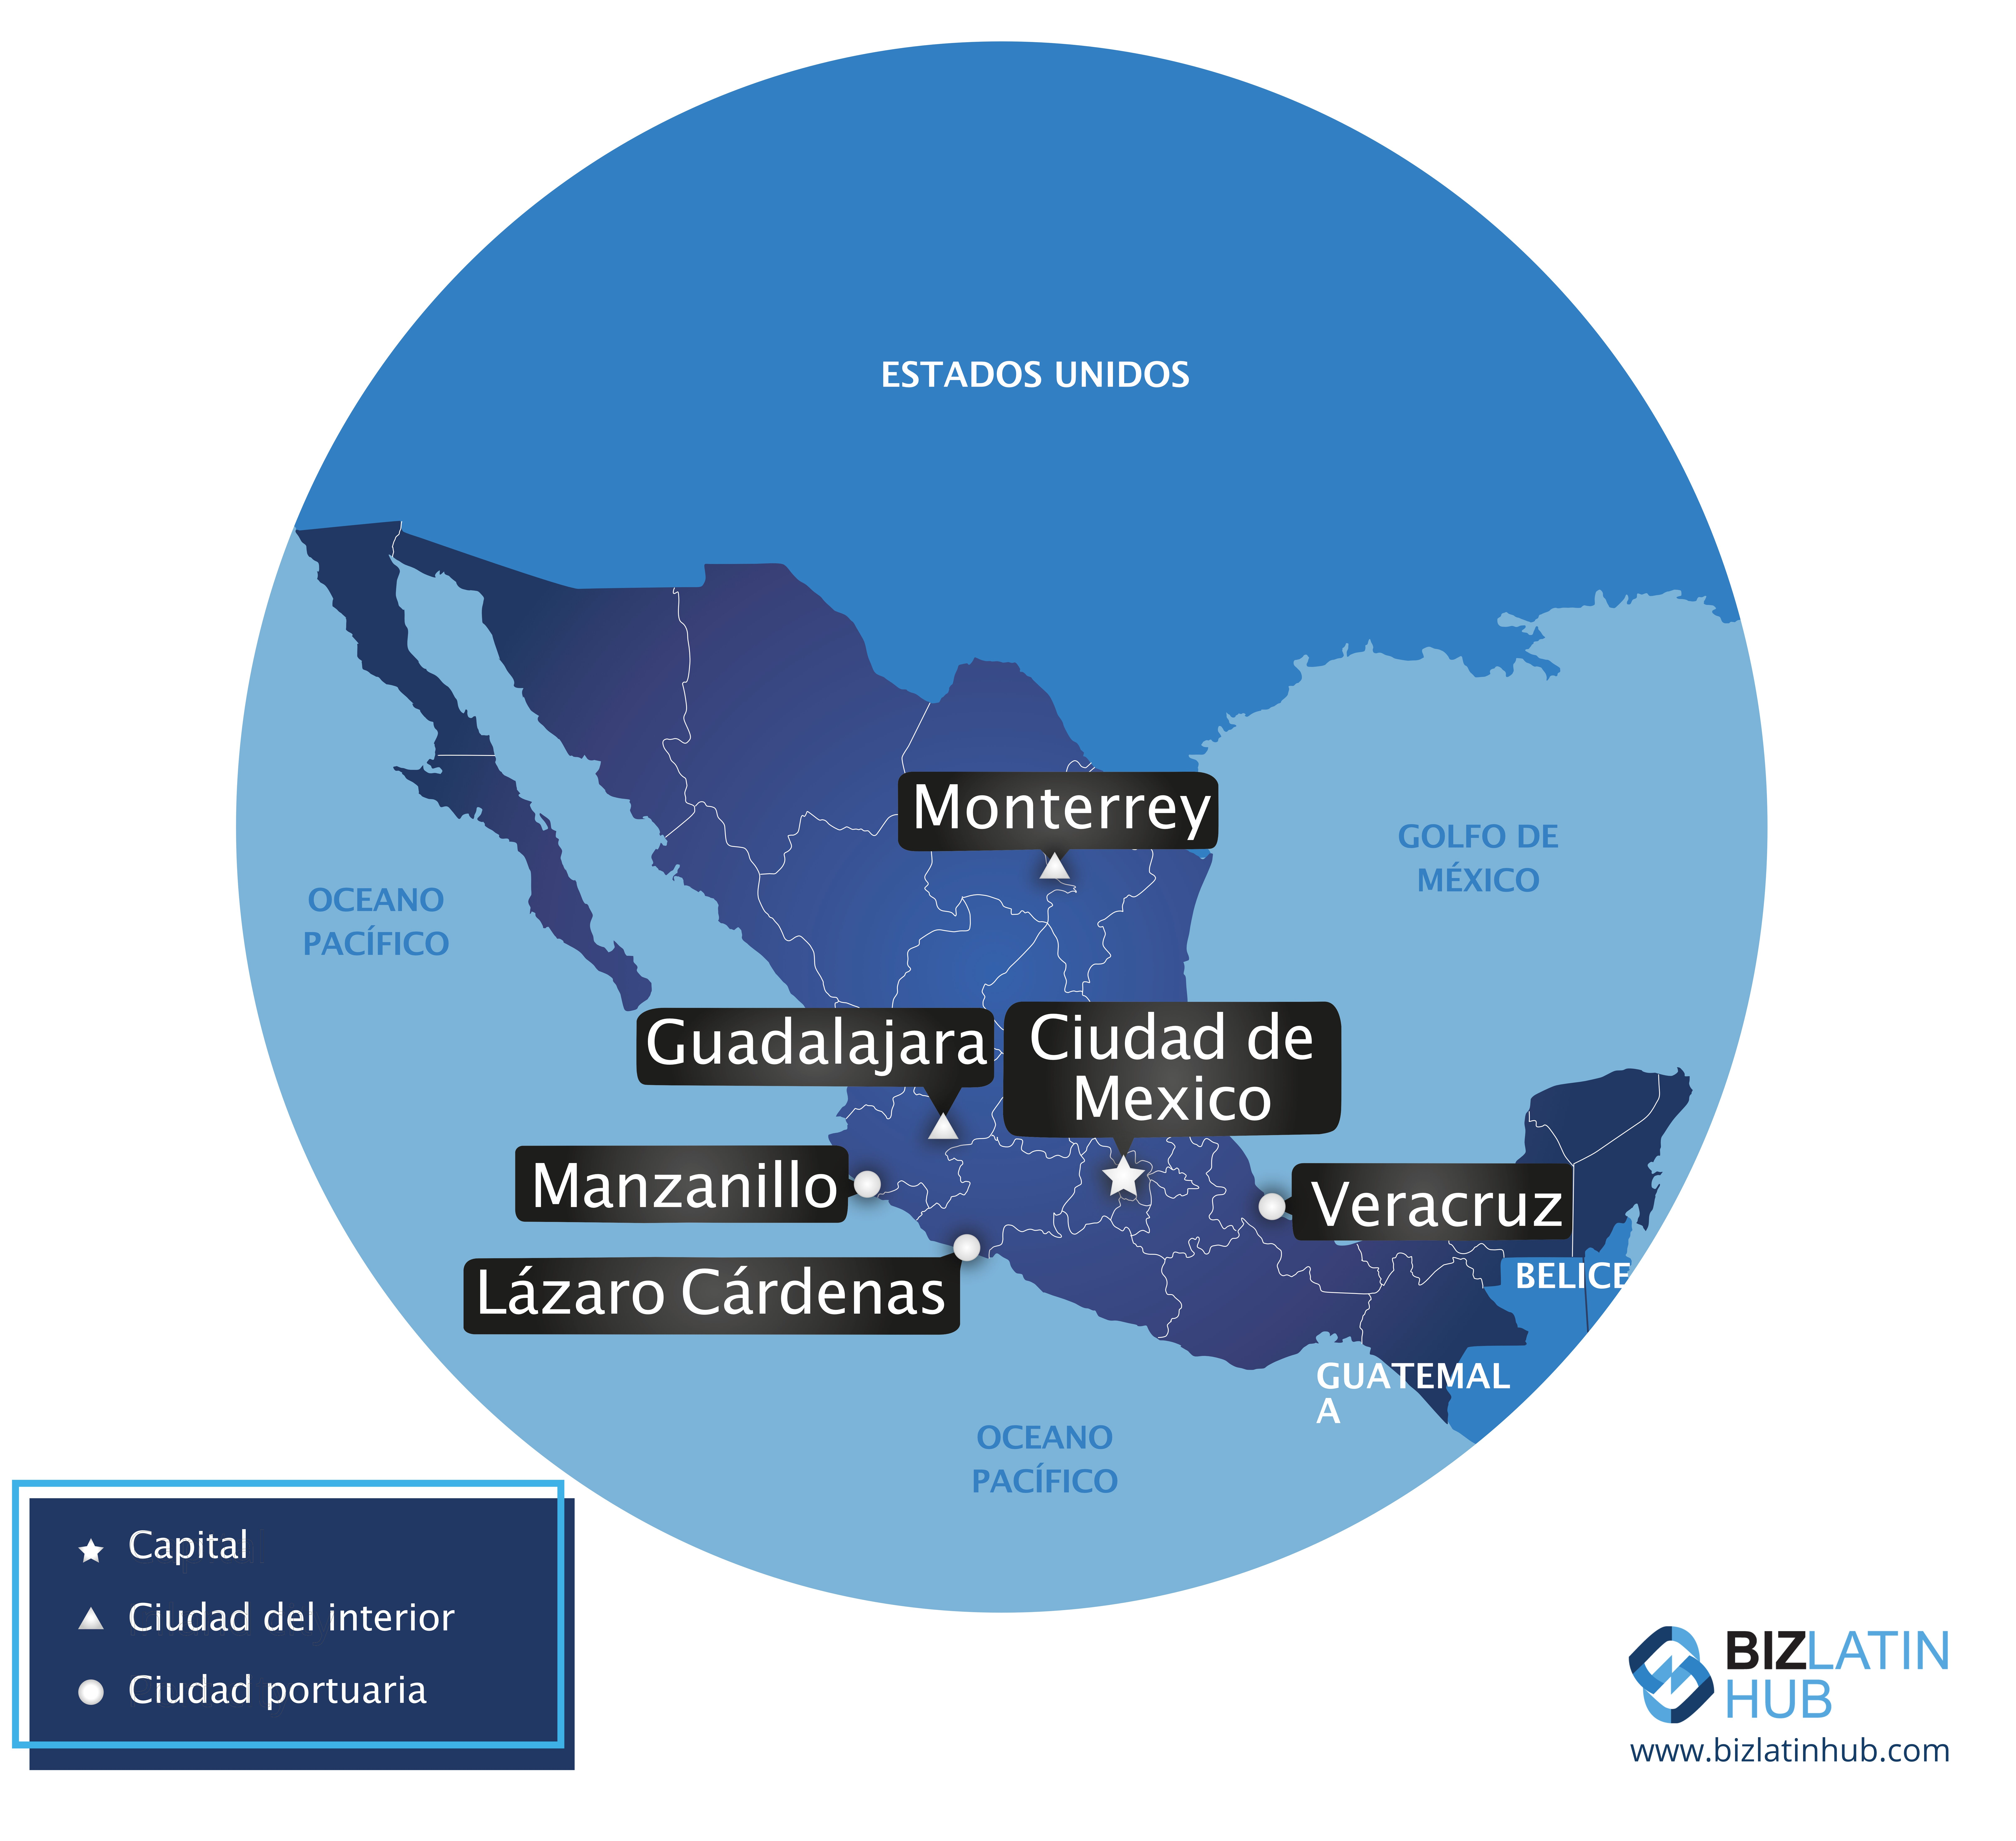 A map of Mexico highlights several cities including Monterrey, Guadalajara, Ciudad de Mexico, Lázaro Cárdenas, Manzanillo, and Veracruz. The map labels these cities—vital for those looking to form an NGO in Mexico—as capital, interior city, or port city and is in shades of blue. An inset legend provides symbol meanings.